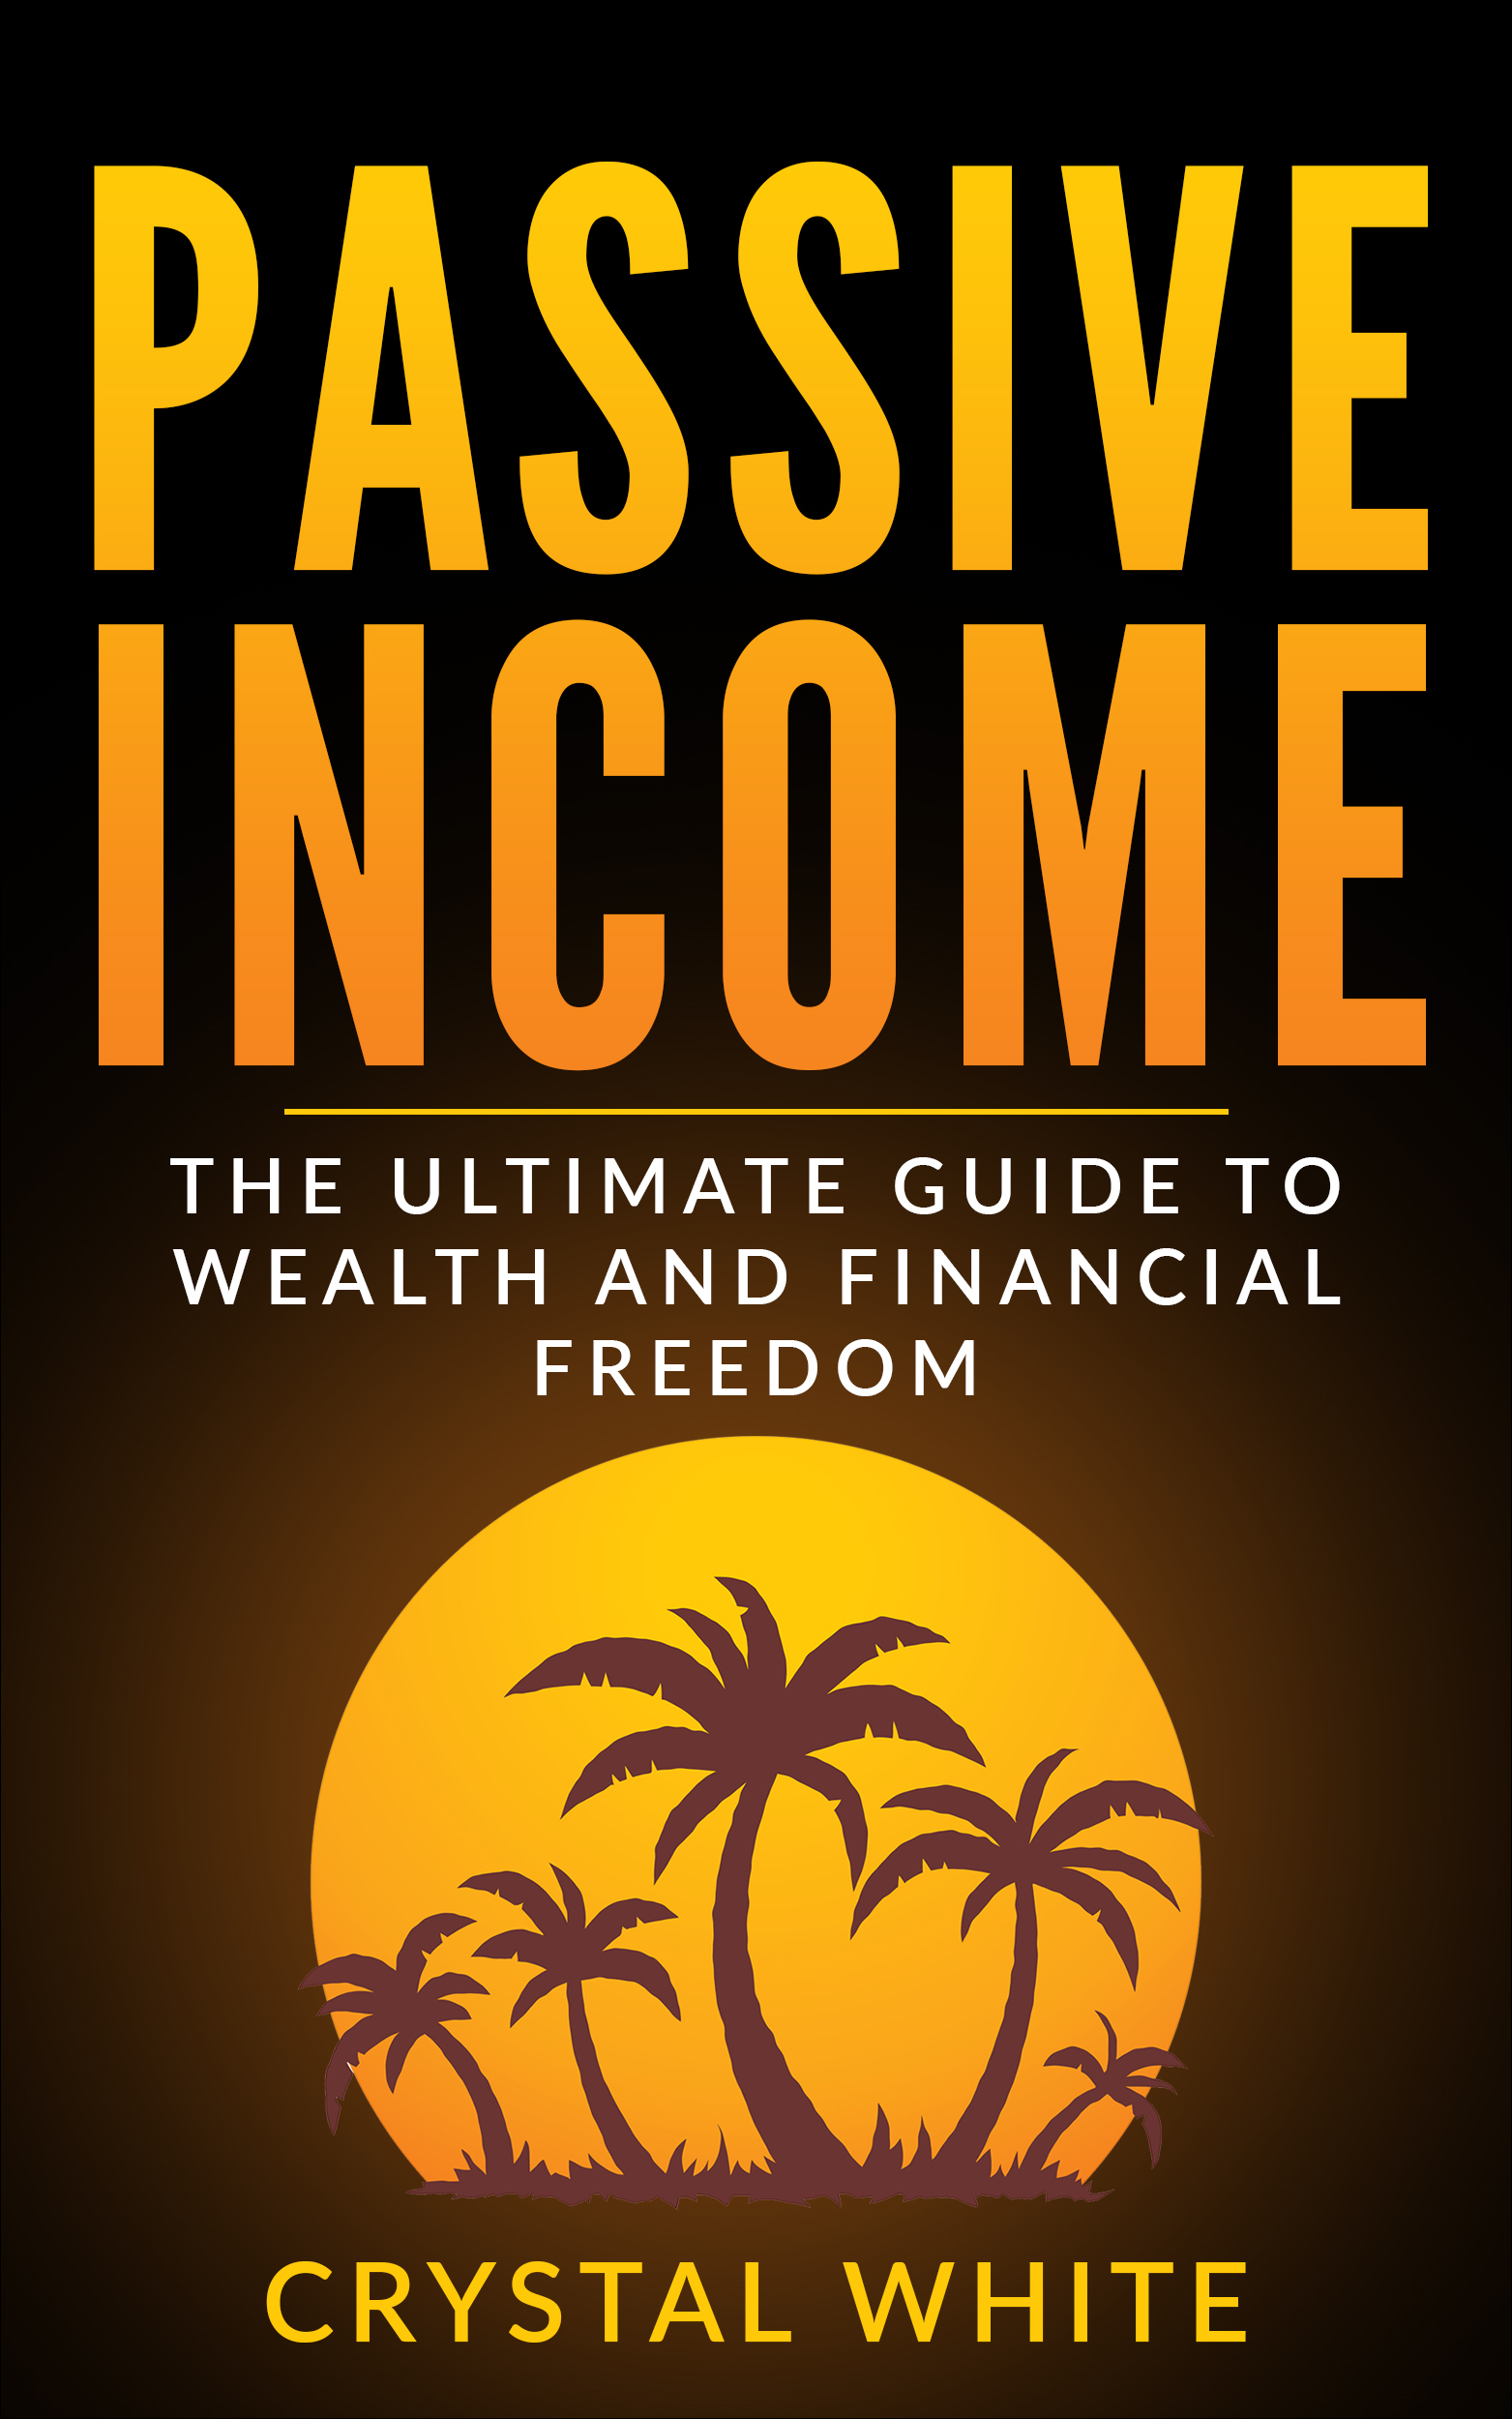 FREE: Passive Income: The Ultimate Guide to Wealth and Financial Freedom by Crystal WHITE